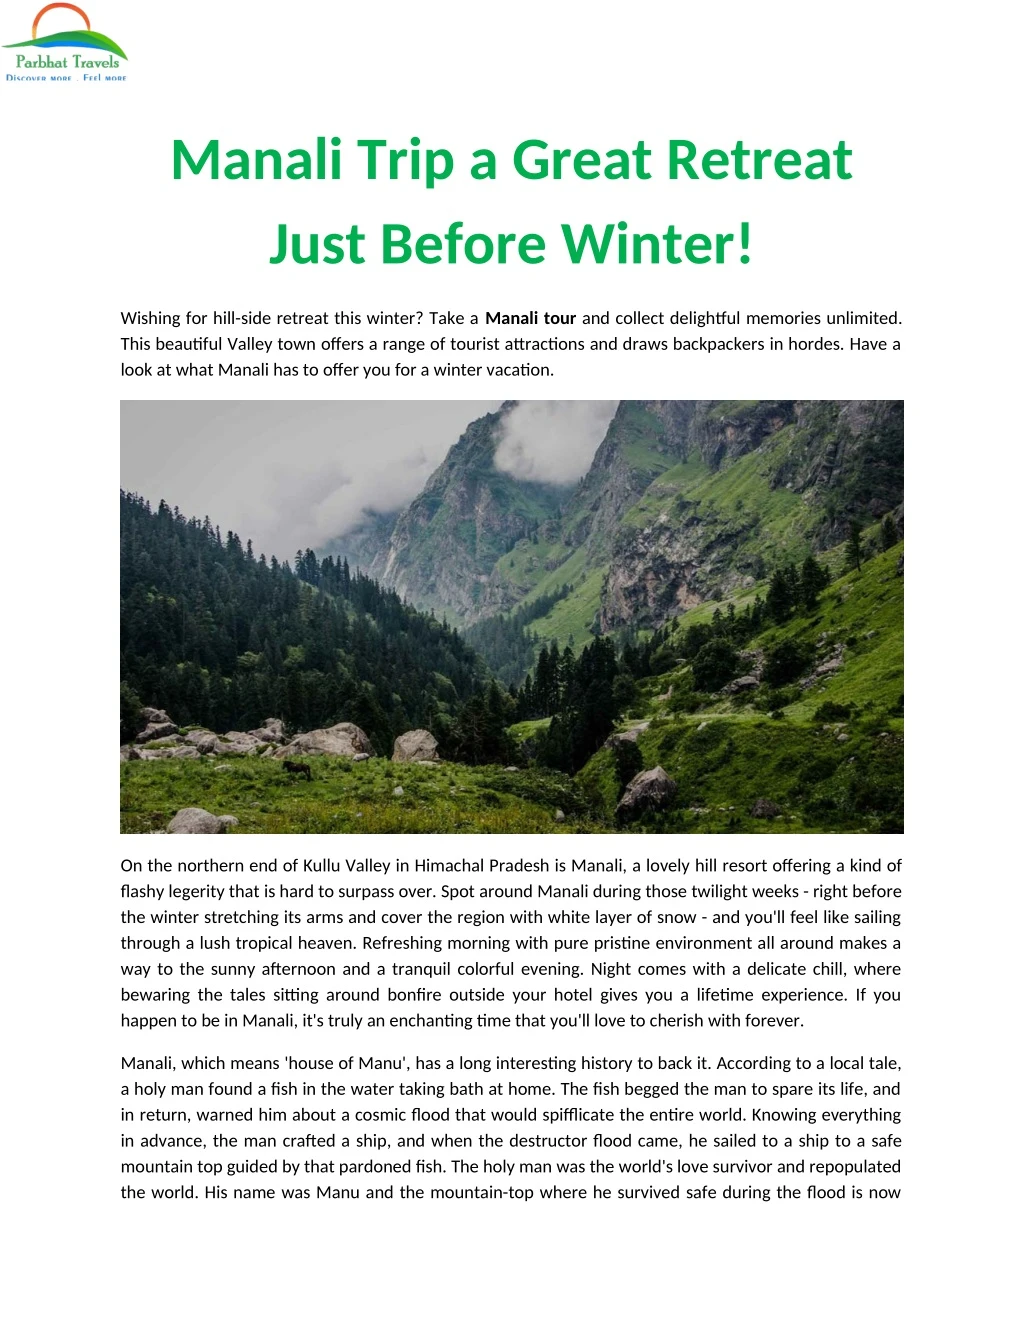 manali trip a great retreat just before winter